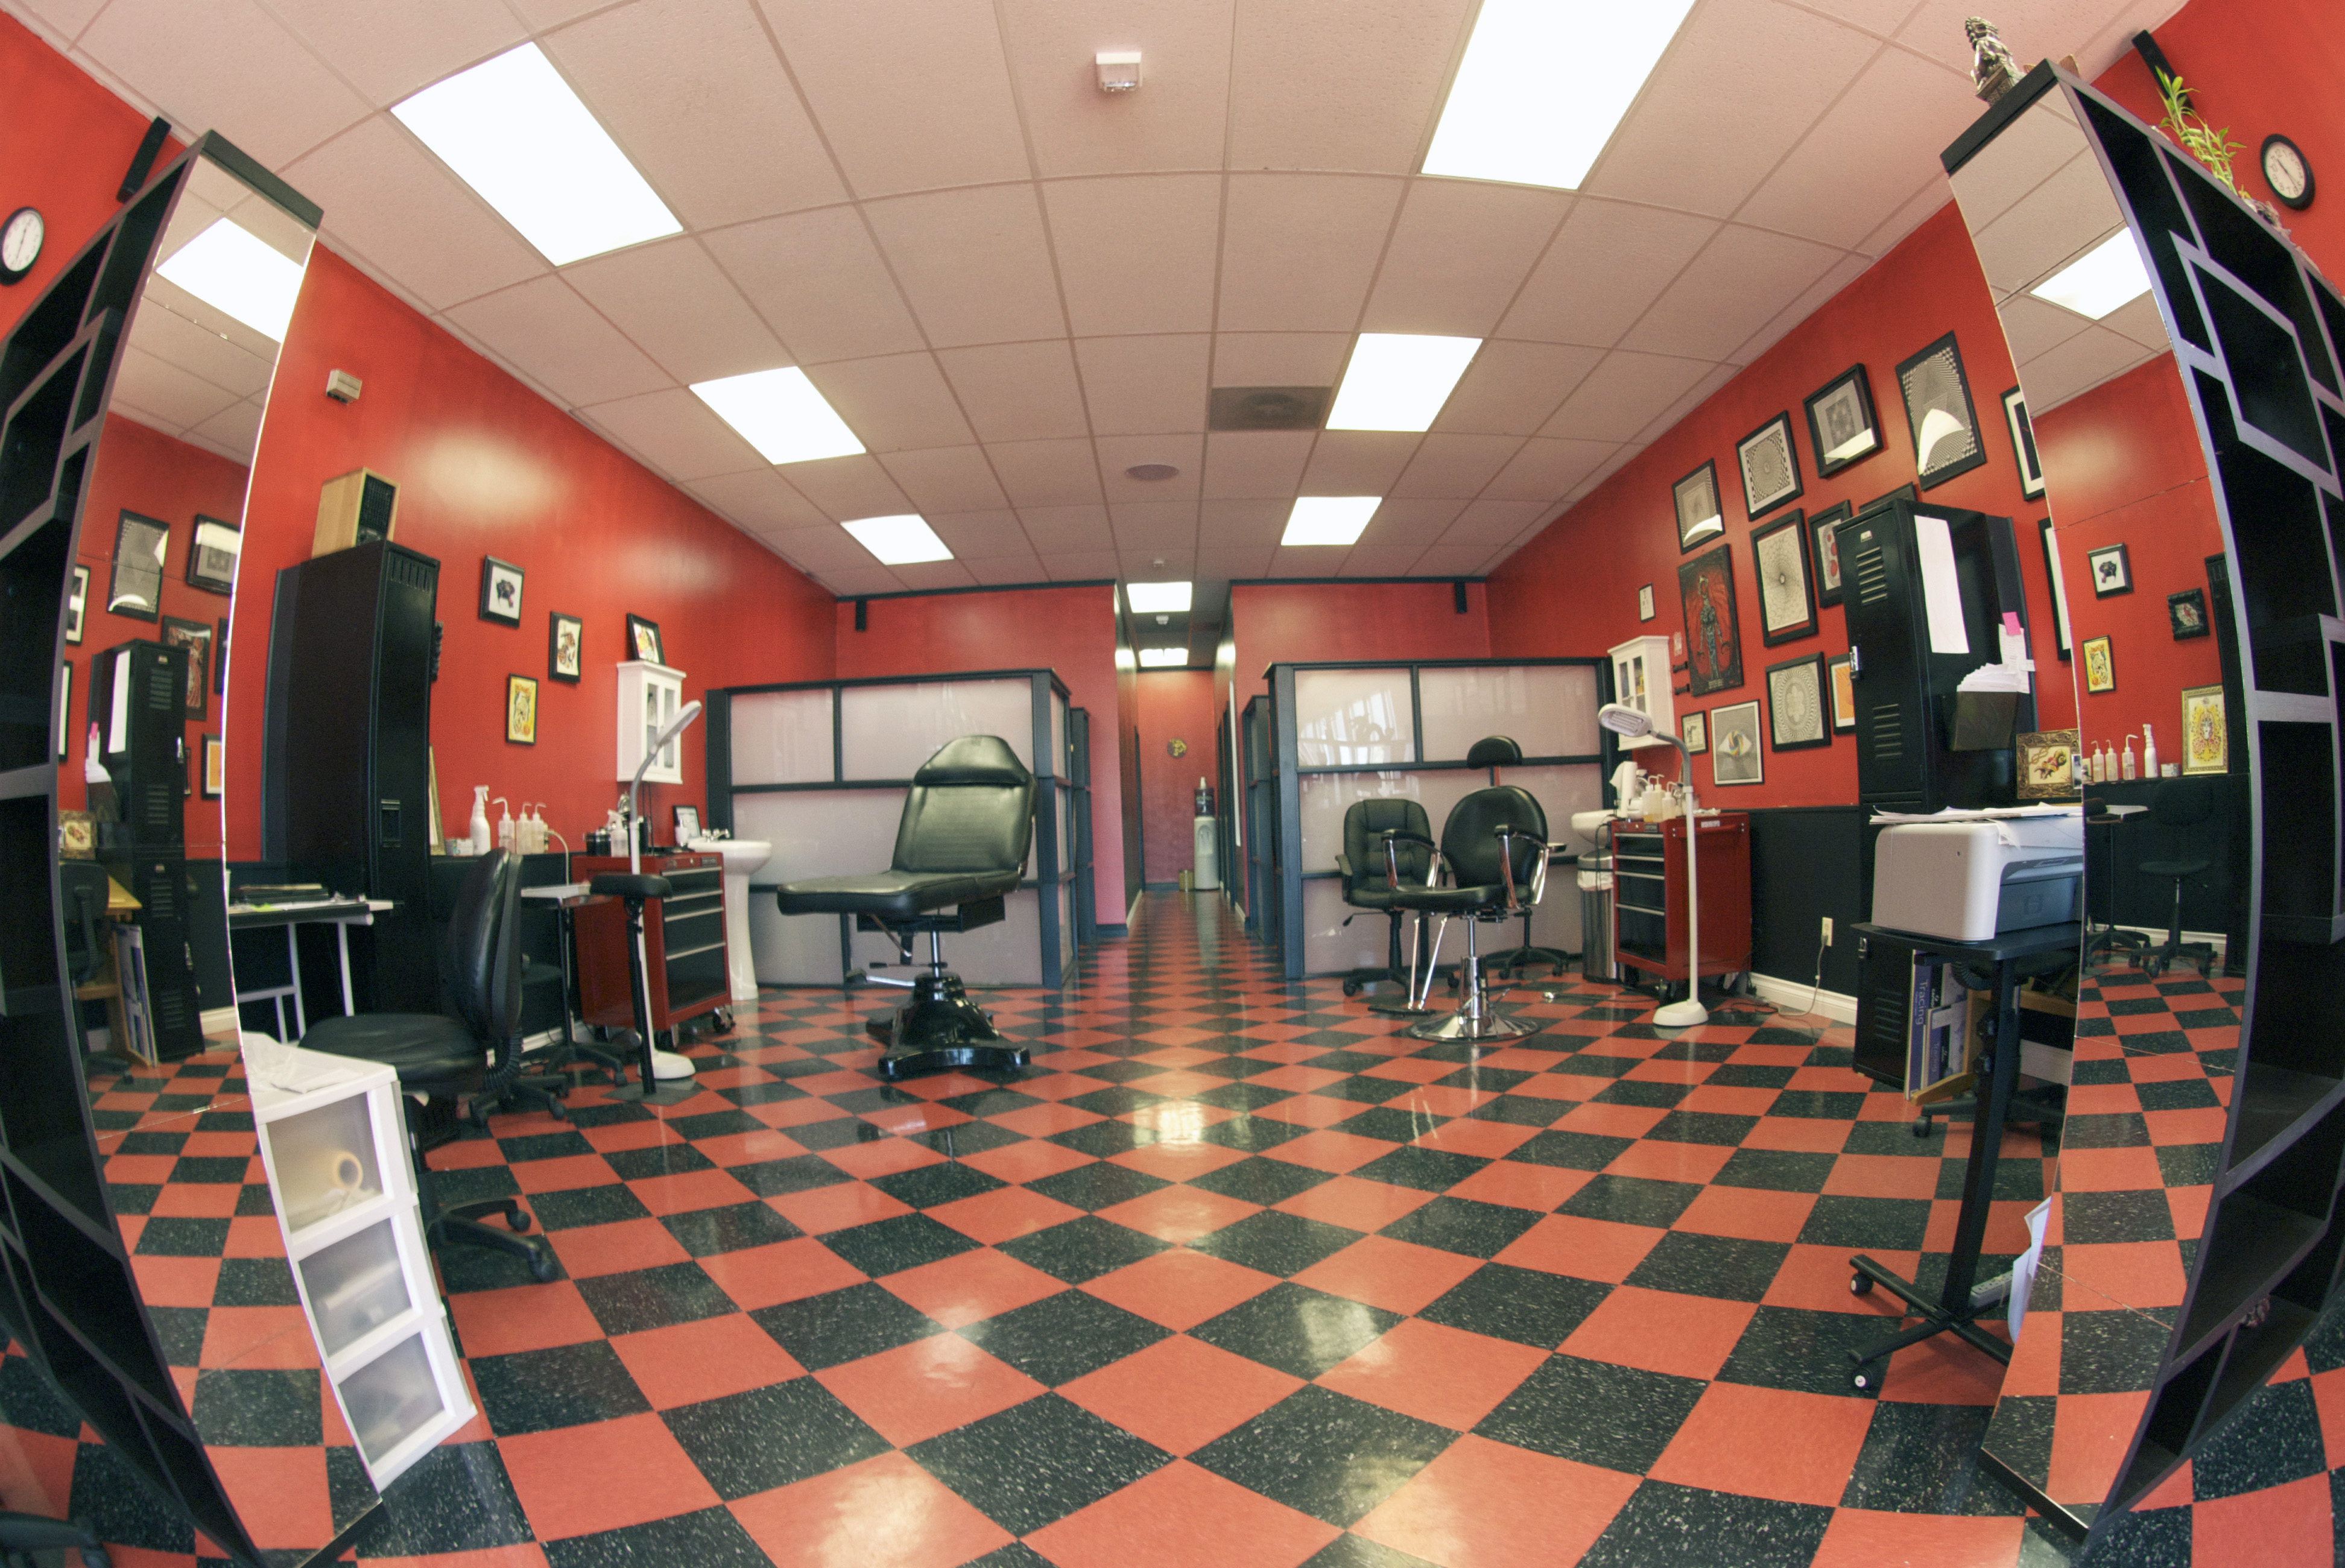 Welcome to Alternative Arts Tattoo! Come visit our new shop, located across